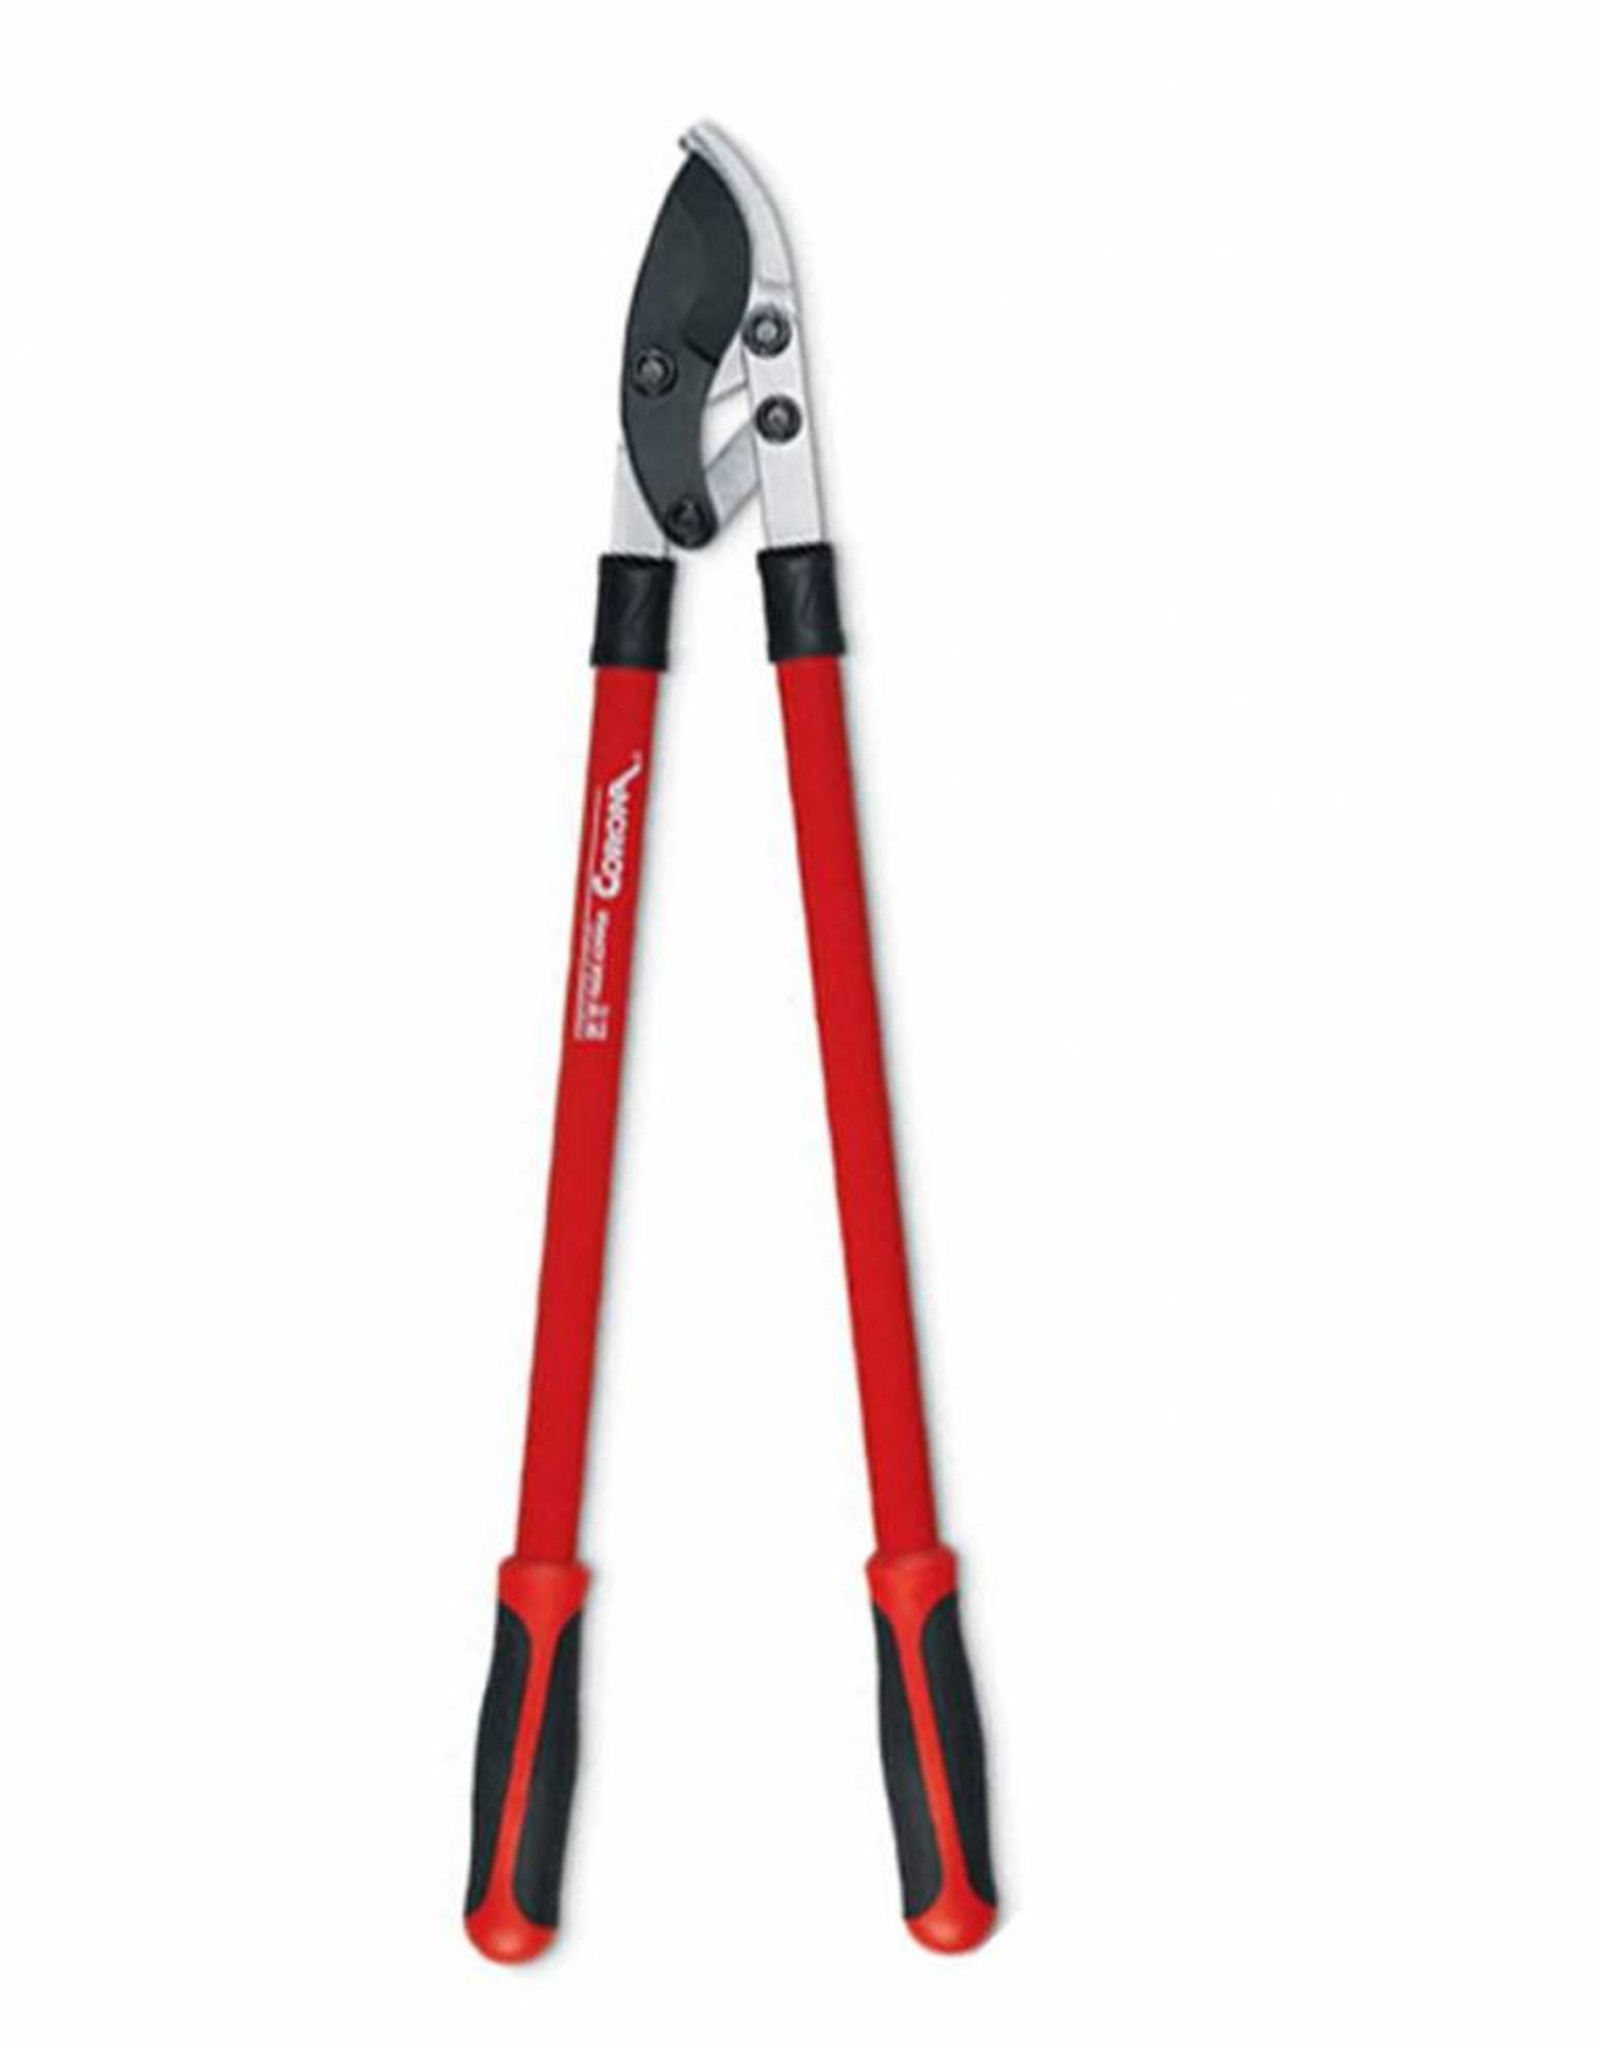 Corona Compound Action Bypass Lopper With 1.5 Inch Cutting Capacity 28in pruner